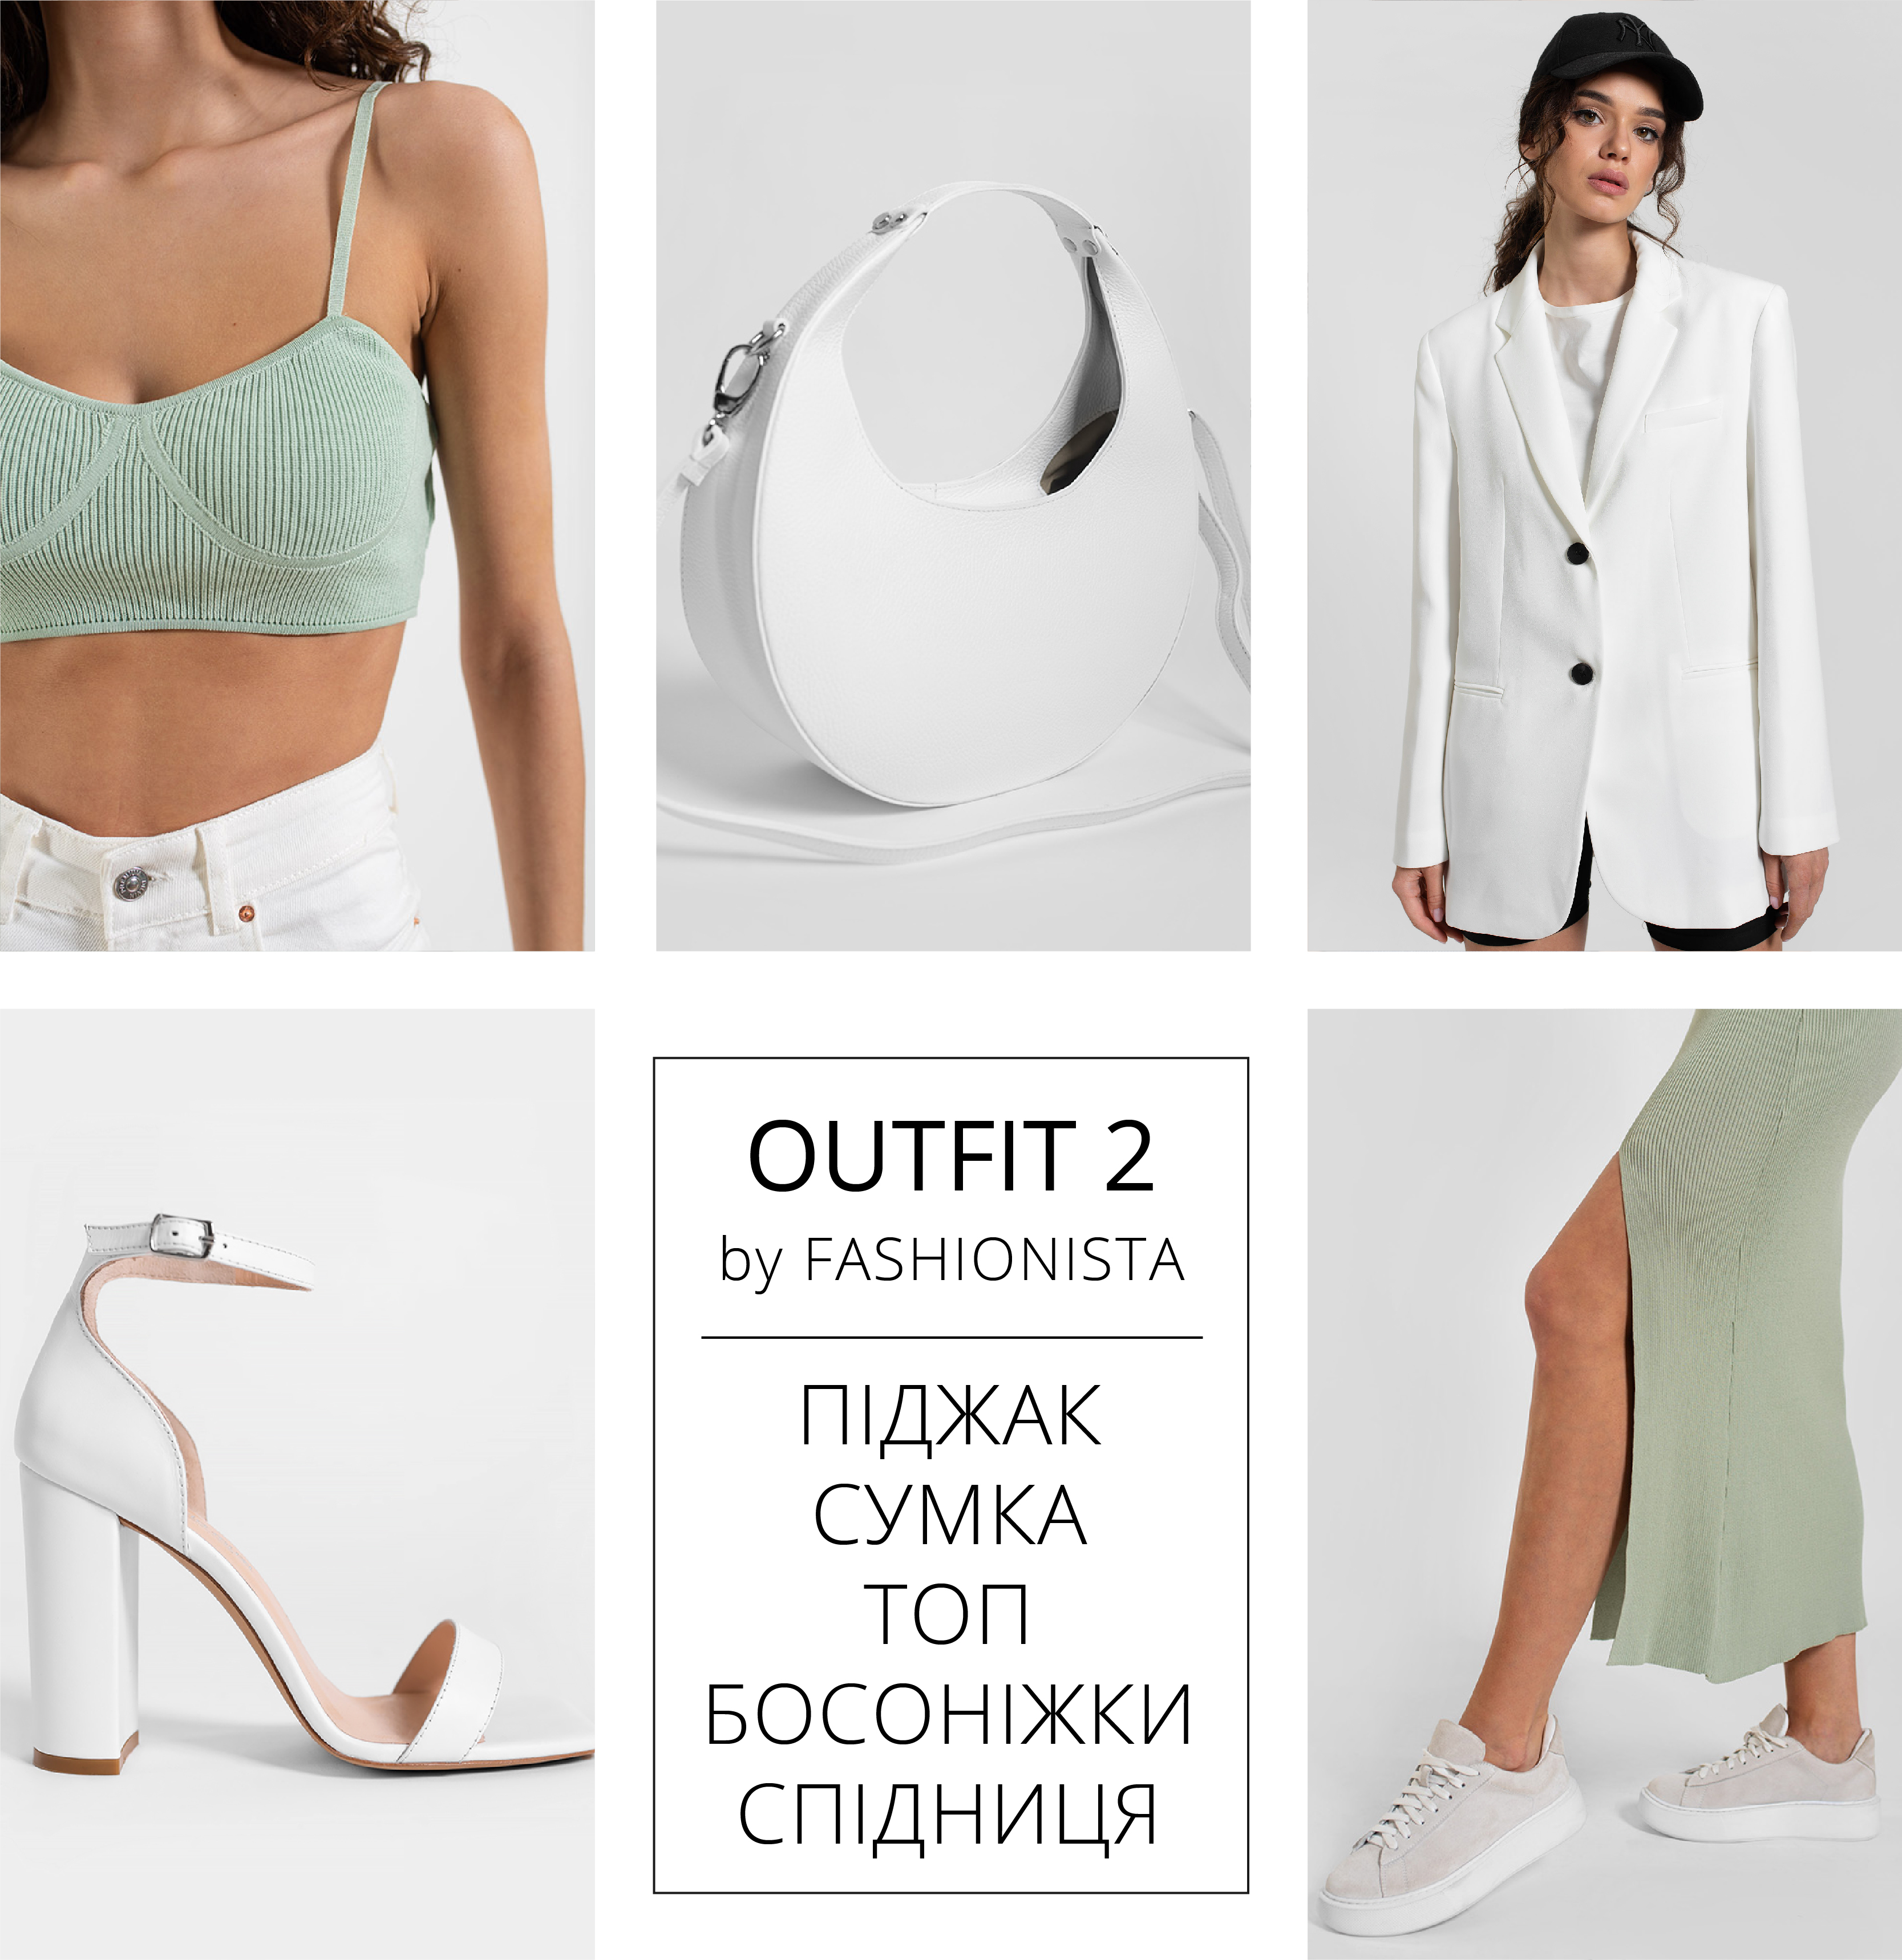 OUTFIT BY FASHIONISTA